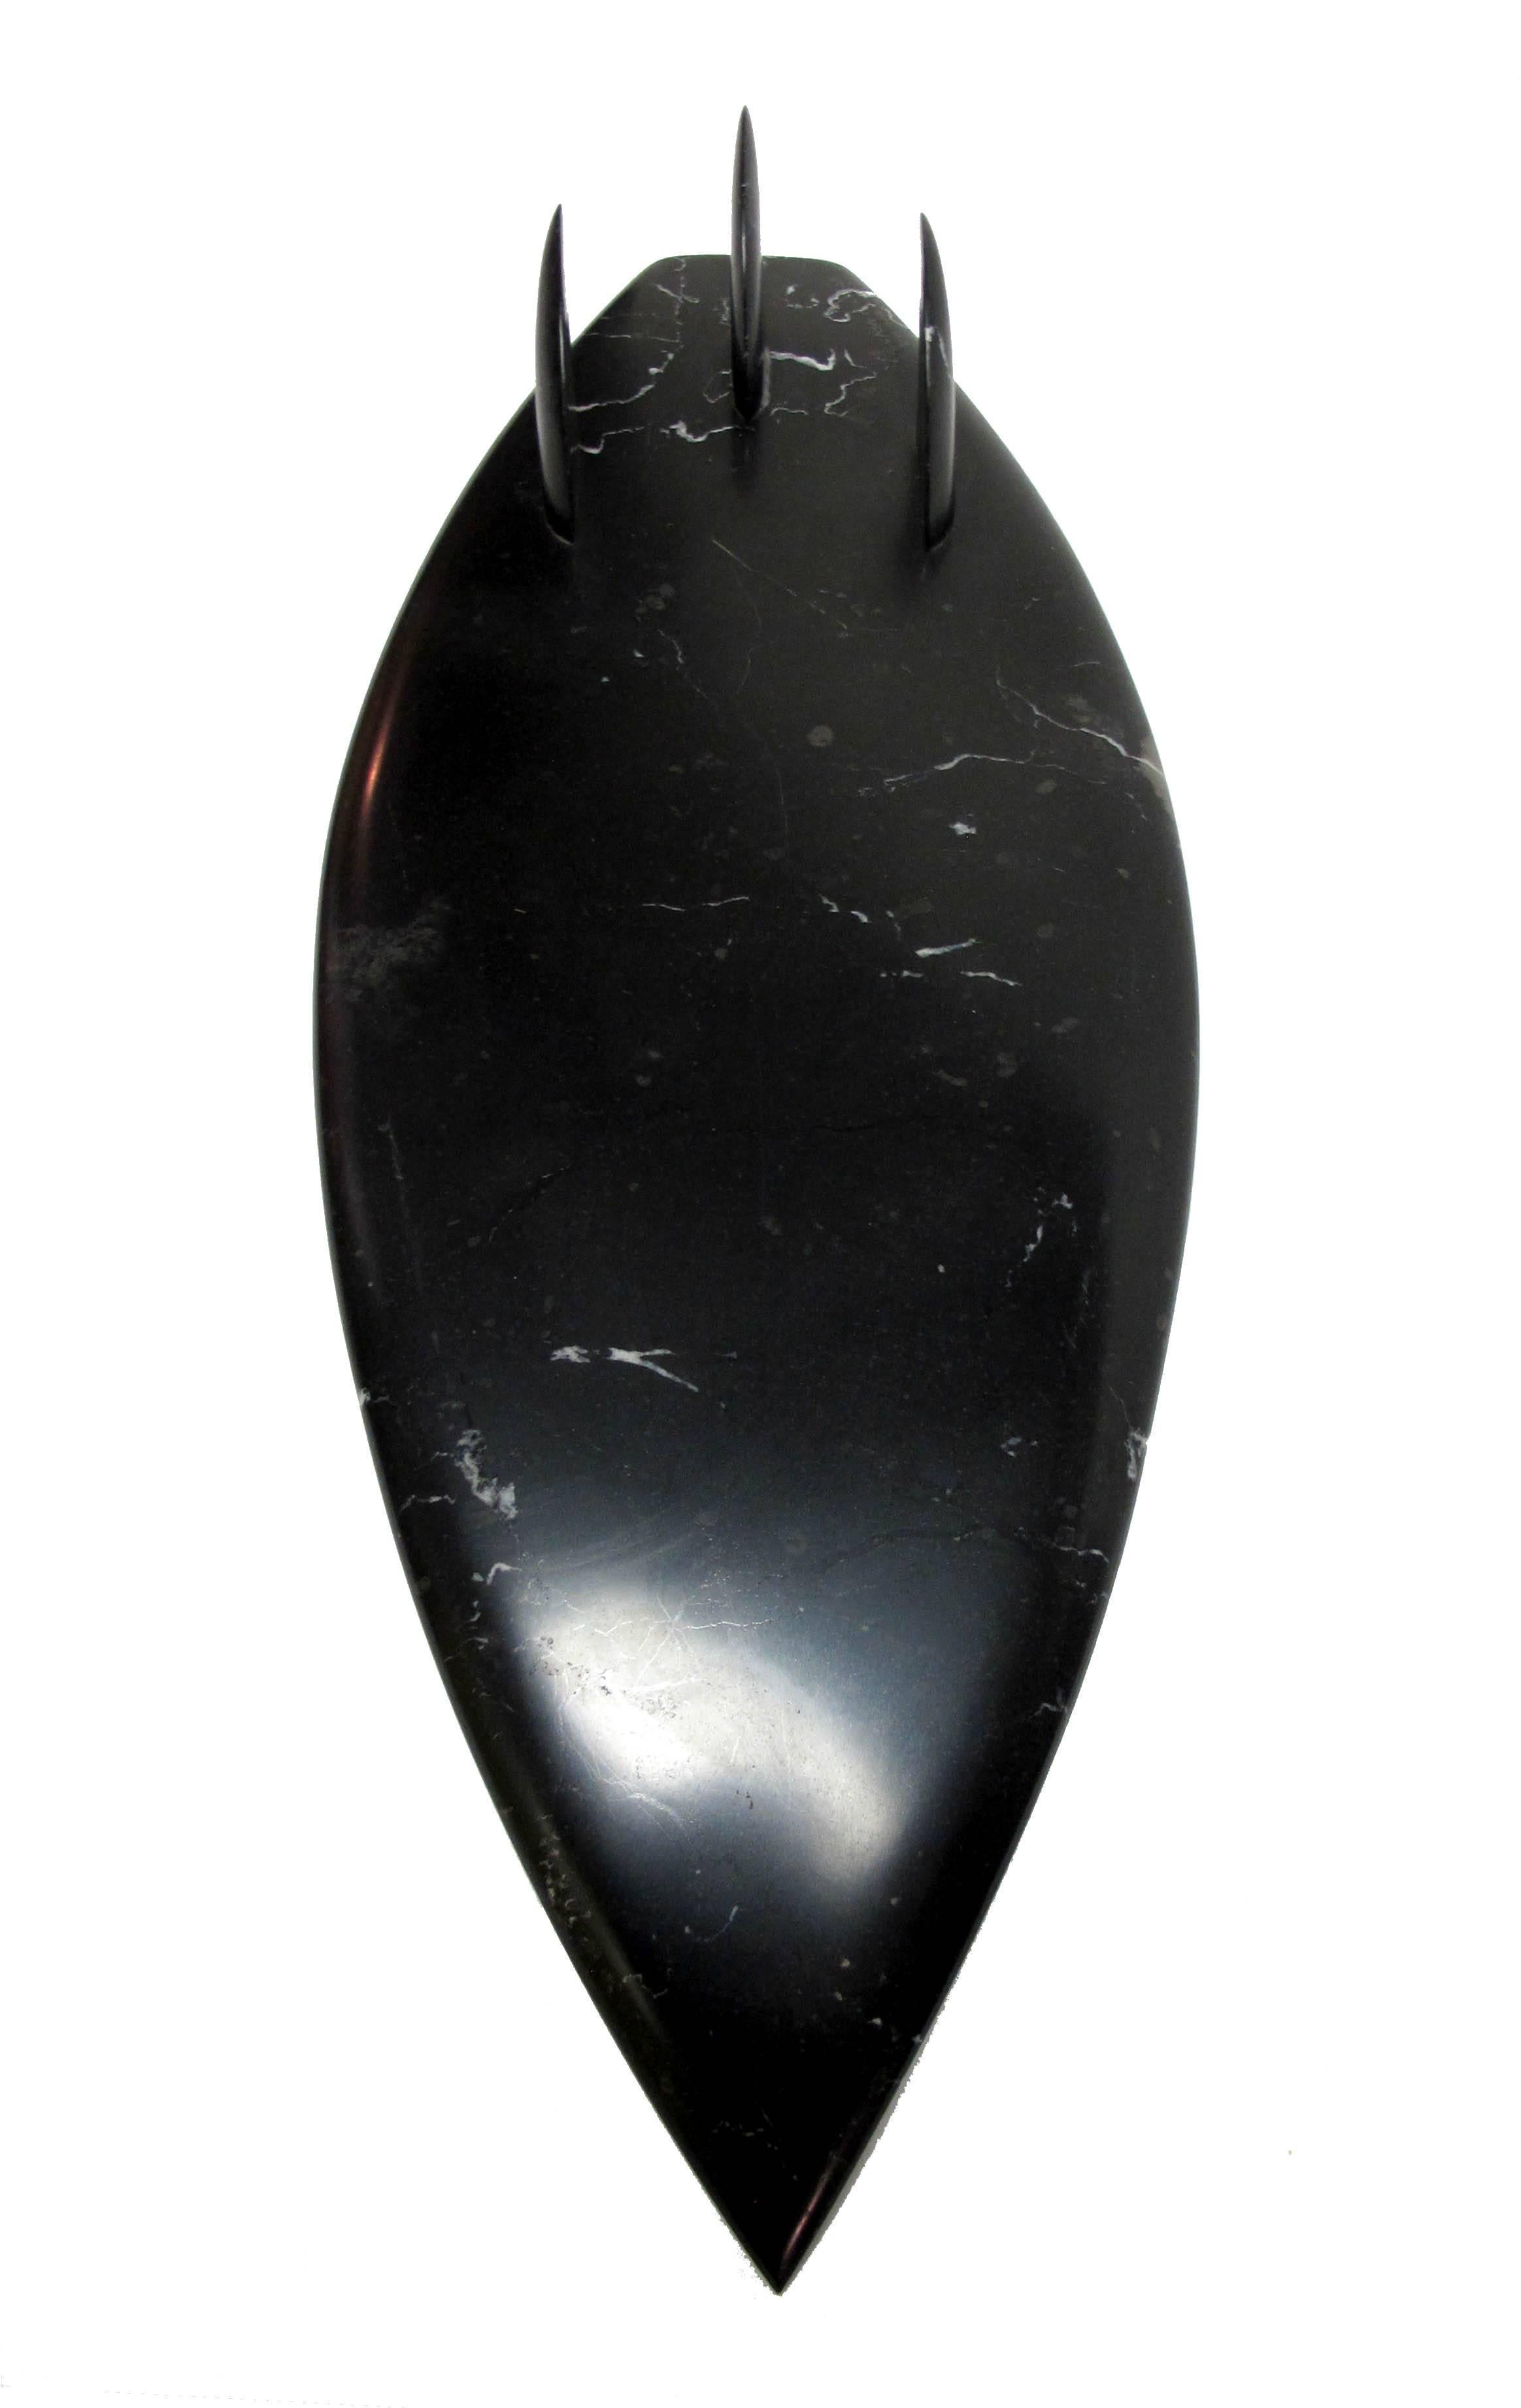 This is a gorgeous hand-carved black marble object. The marble is polished and with an amazing tactile feeling. The weight and the feeling of the smooth polished marble is the best. 

This piece celebrates our connection to natural materials and